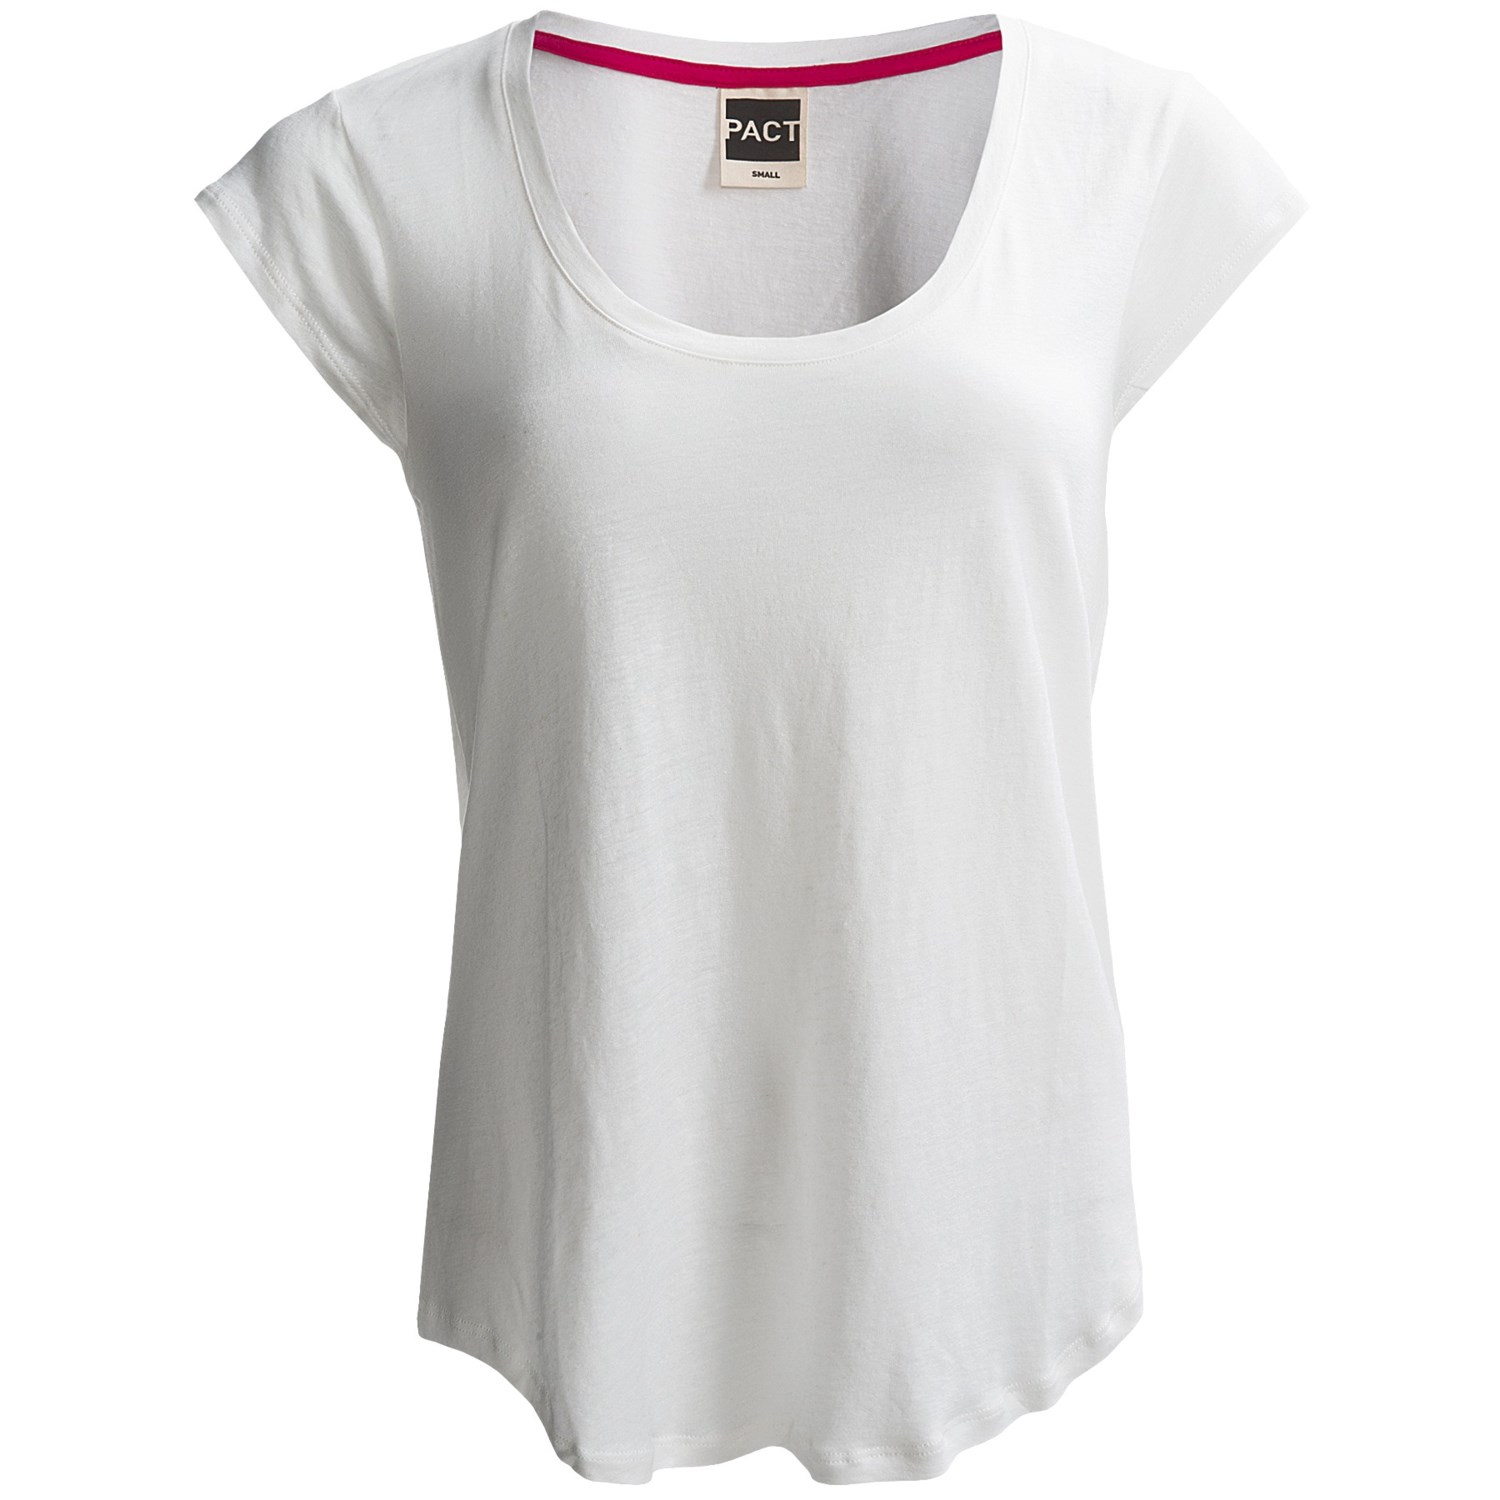 PACT Relaxed Fit T-Shirt - Short Sleeve (For Women) - Save 33%